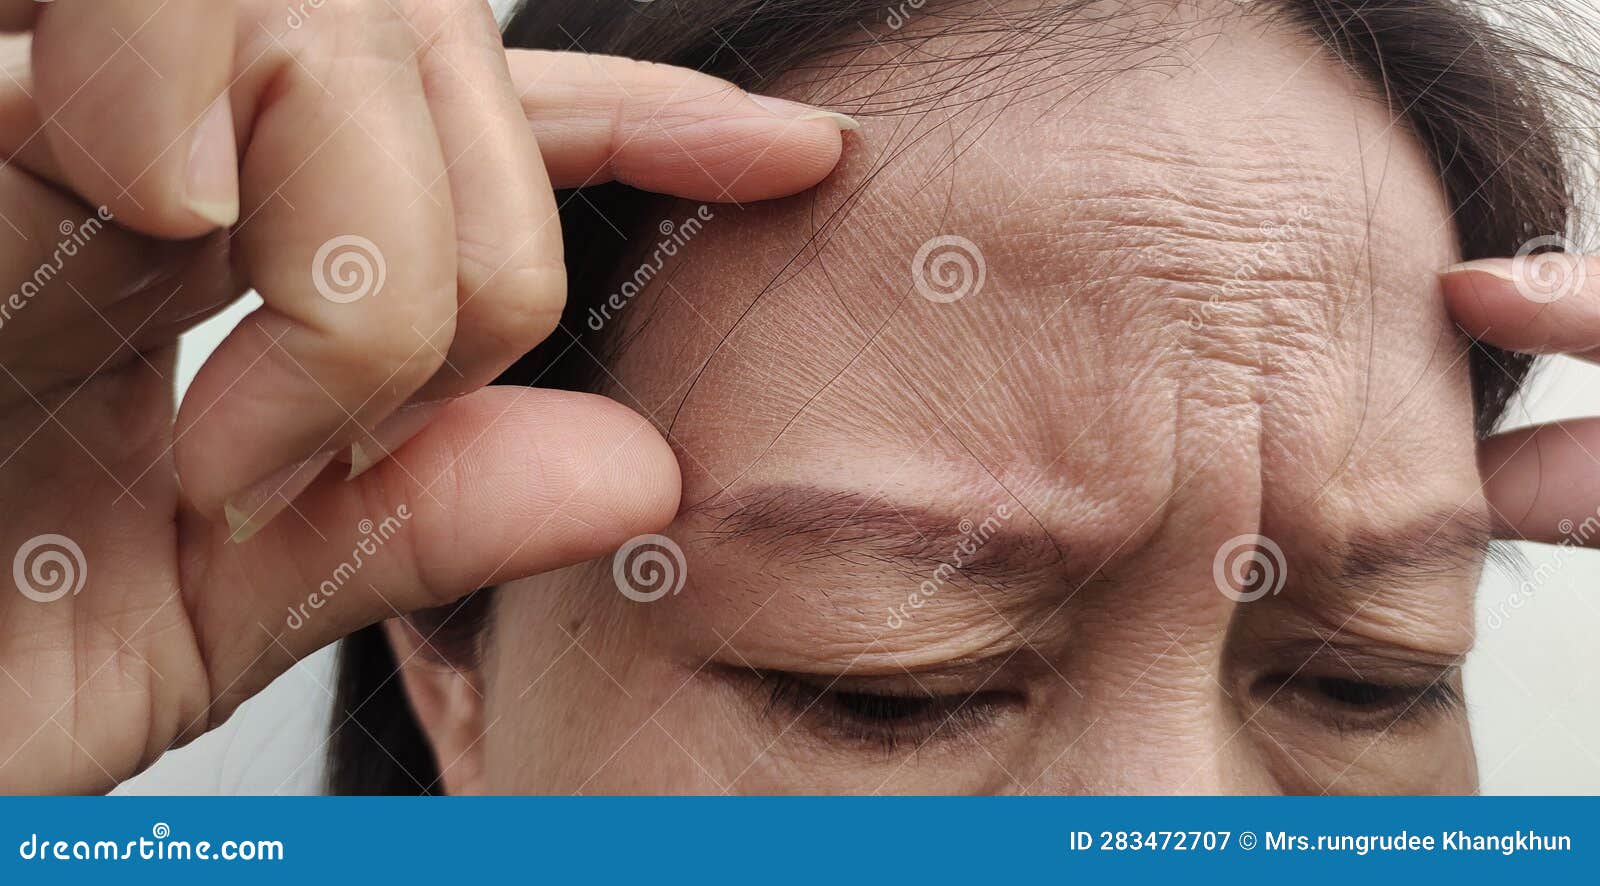 The Flabby Skin Wrinkles And Ptosis Beside The Eyelid Forehead Lines